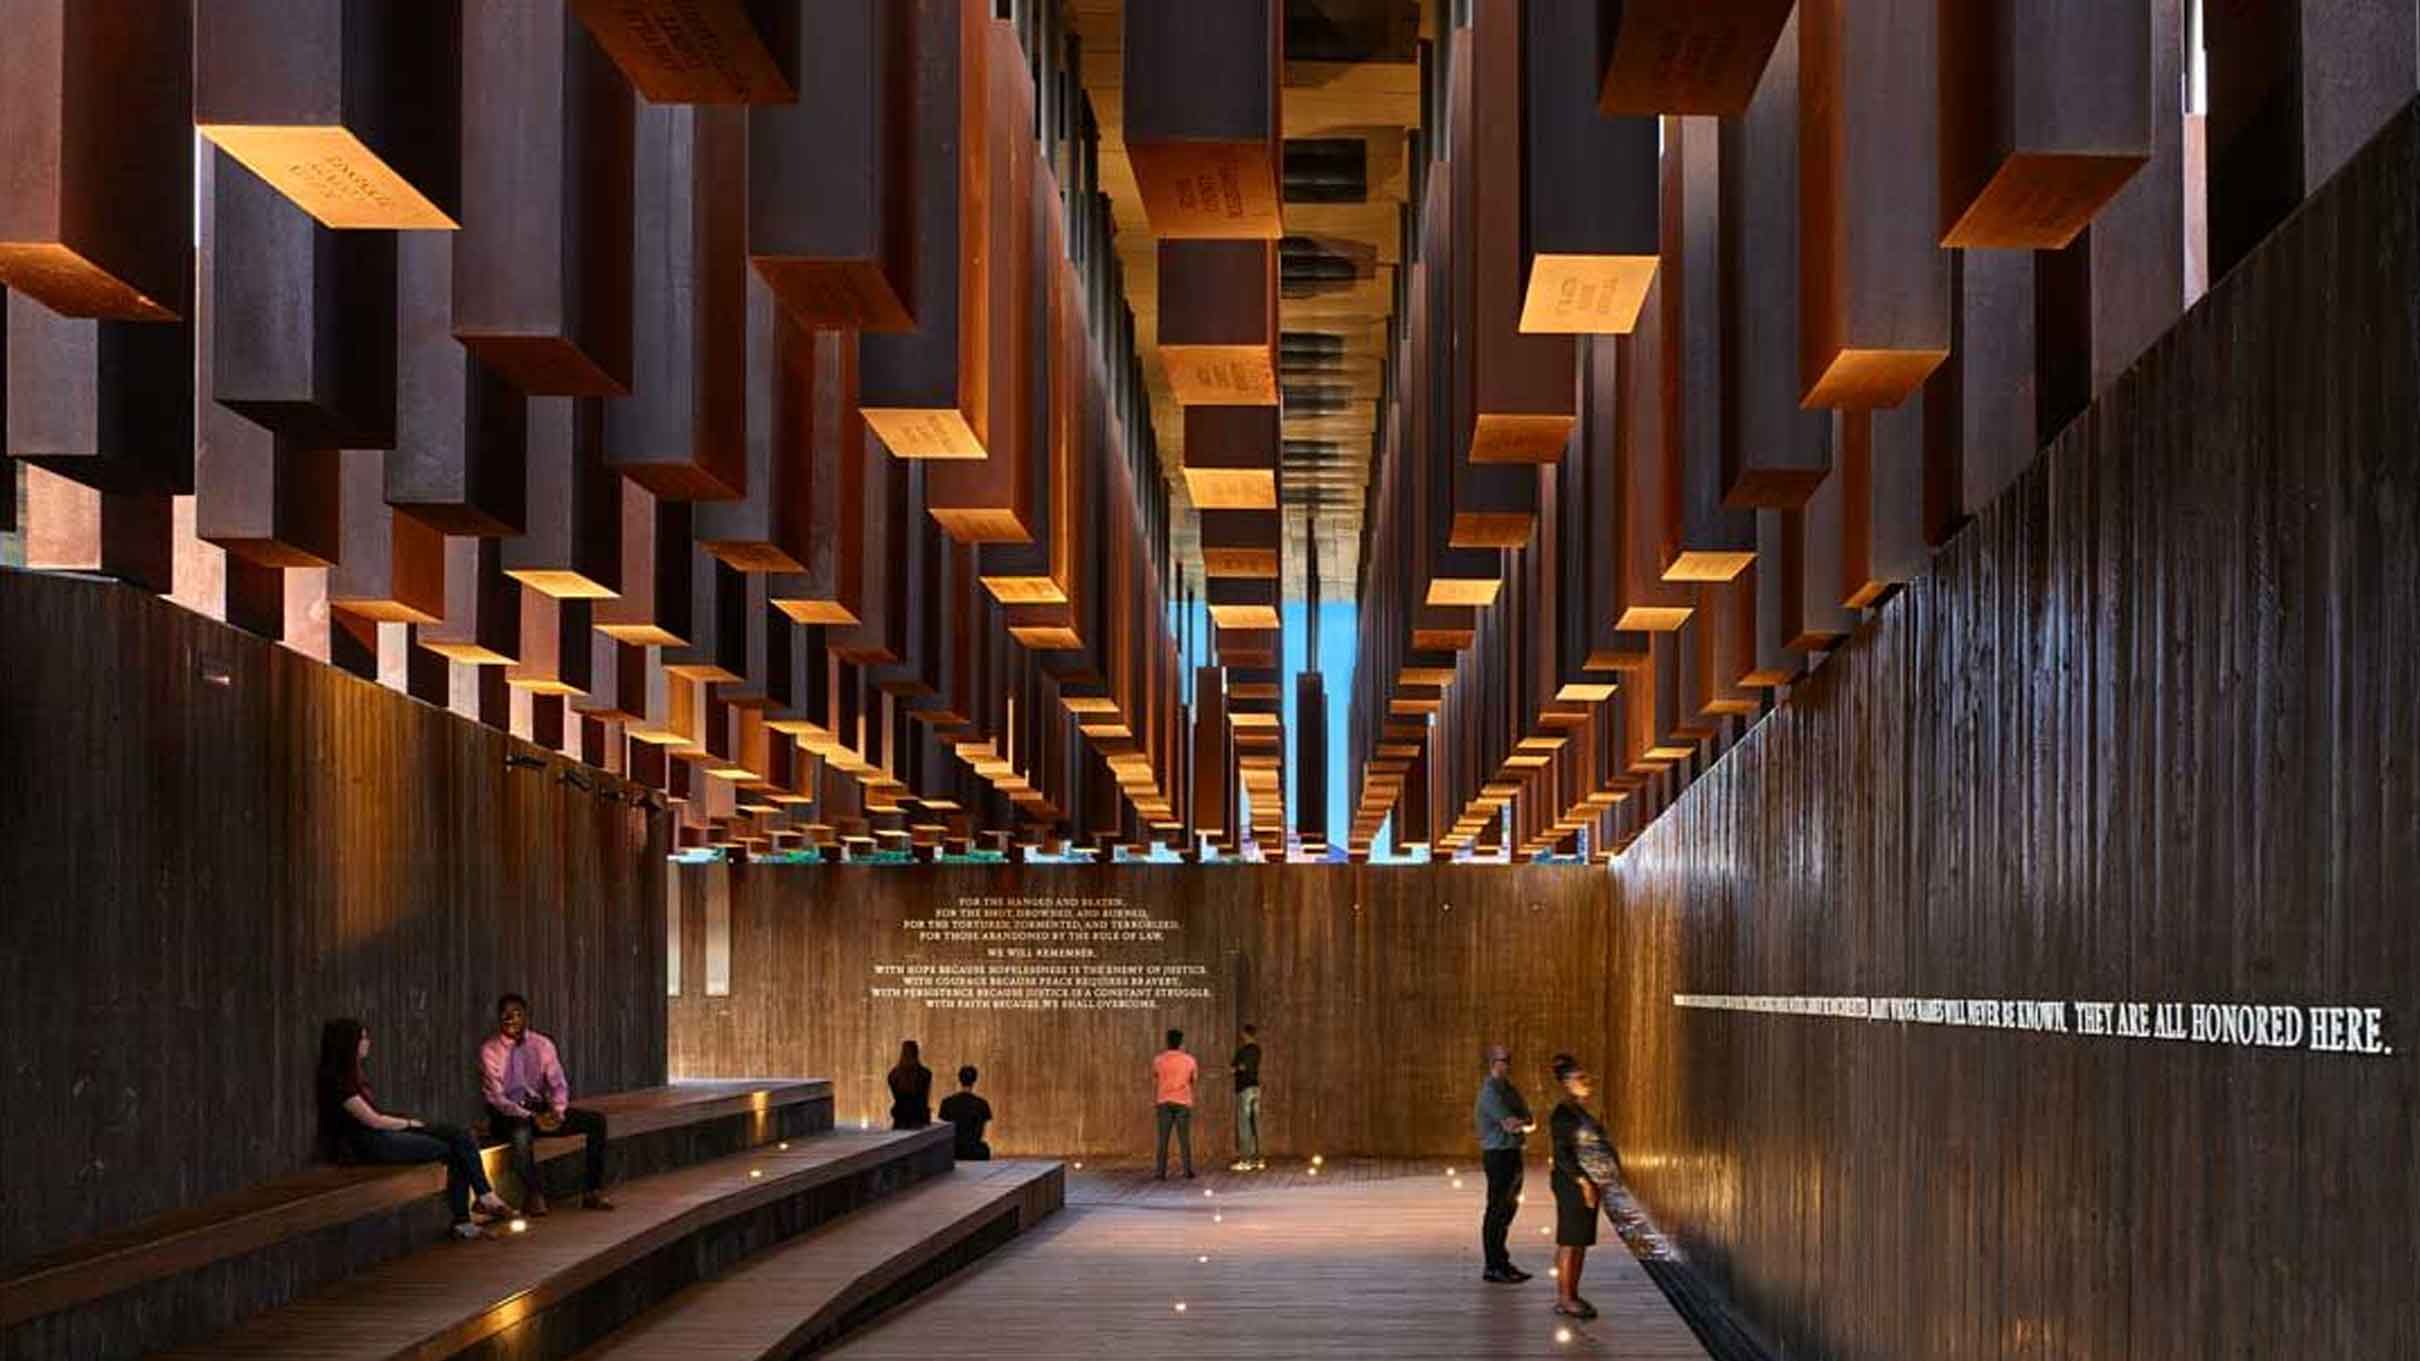 EJI’s National Memorial for Peace and Justice in Montgomery, Alabama (Mass Design Group / Photo credit: Alan Karchmer) (source: https://museumandmemorial.eji.org/memorial and https://massdesigngroup.org/work/design/national-memorial-peace-and-justice)